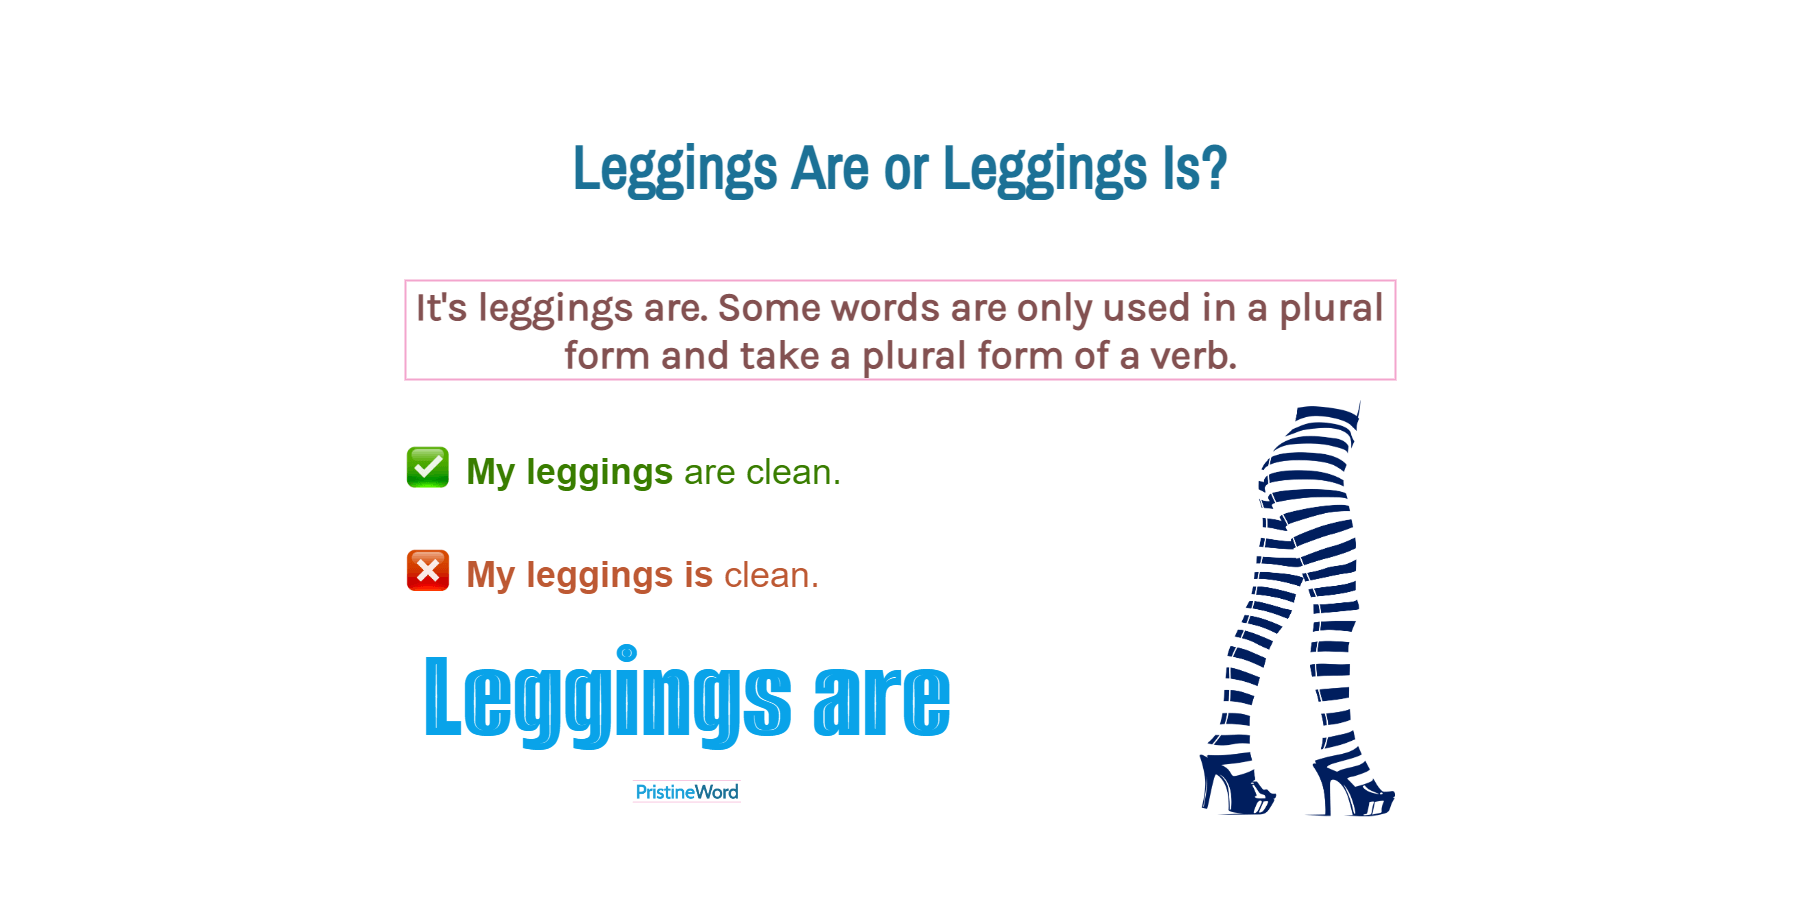 Leggings Are Or Leggings Is. Which Is Correct?